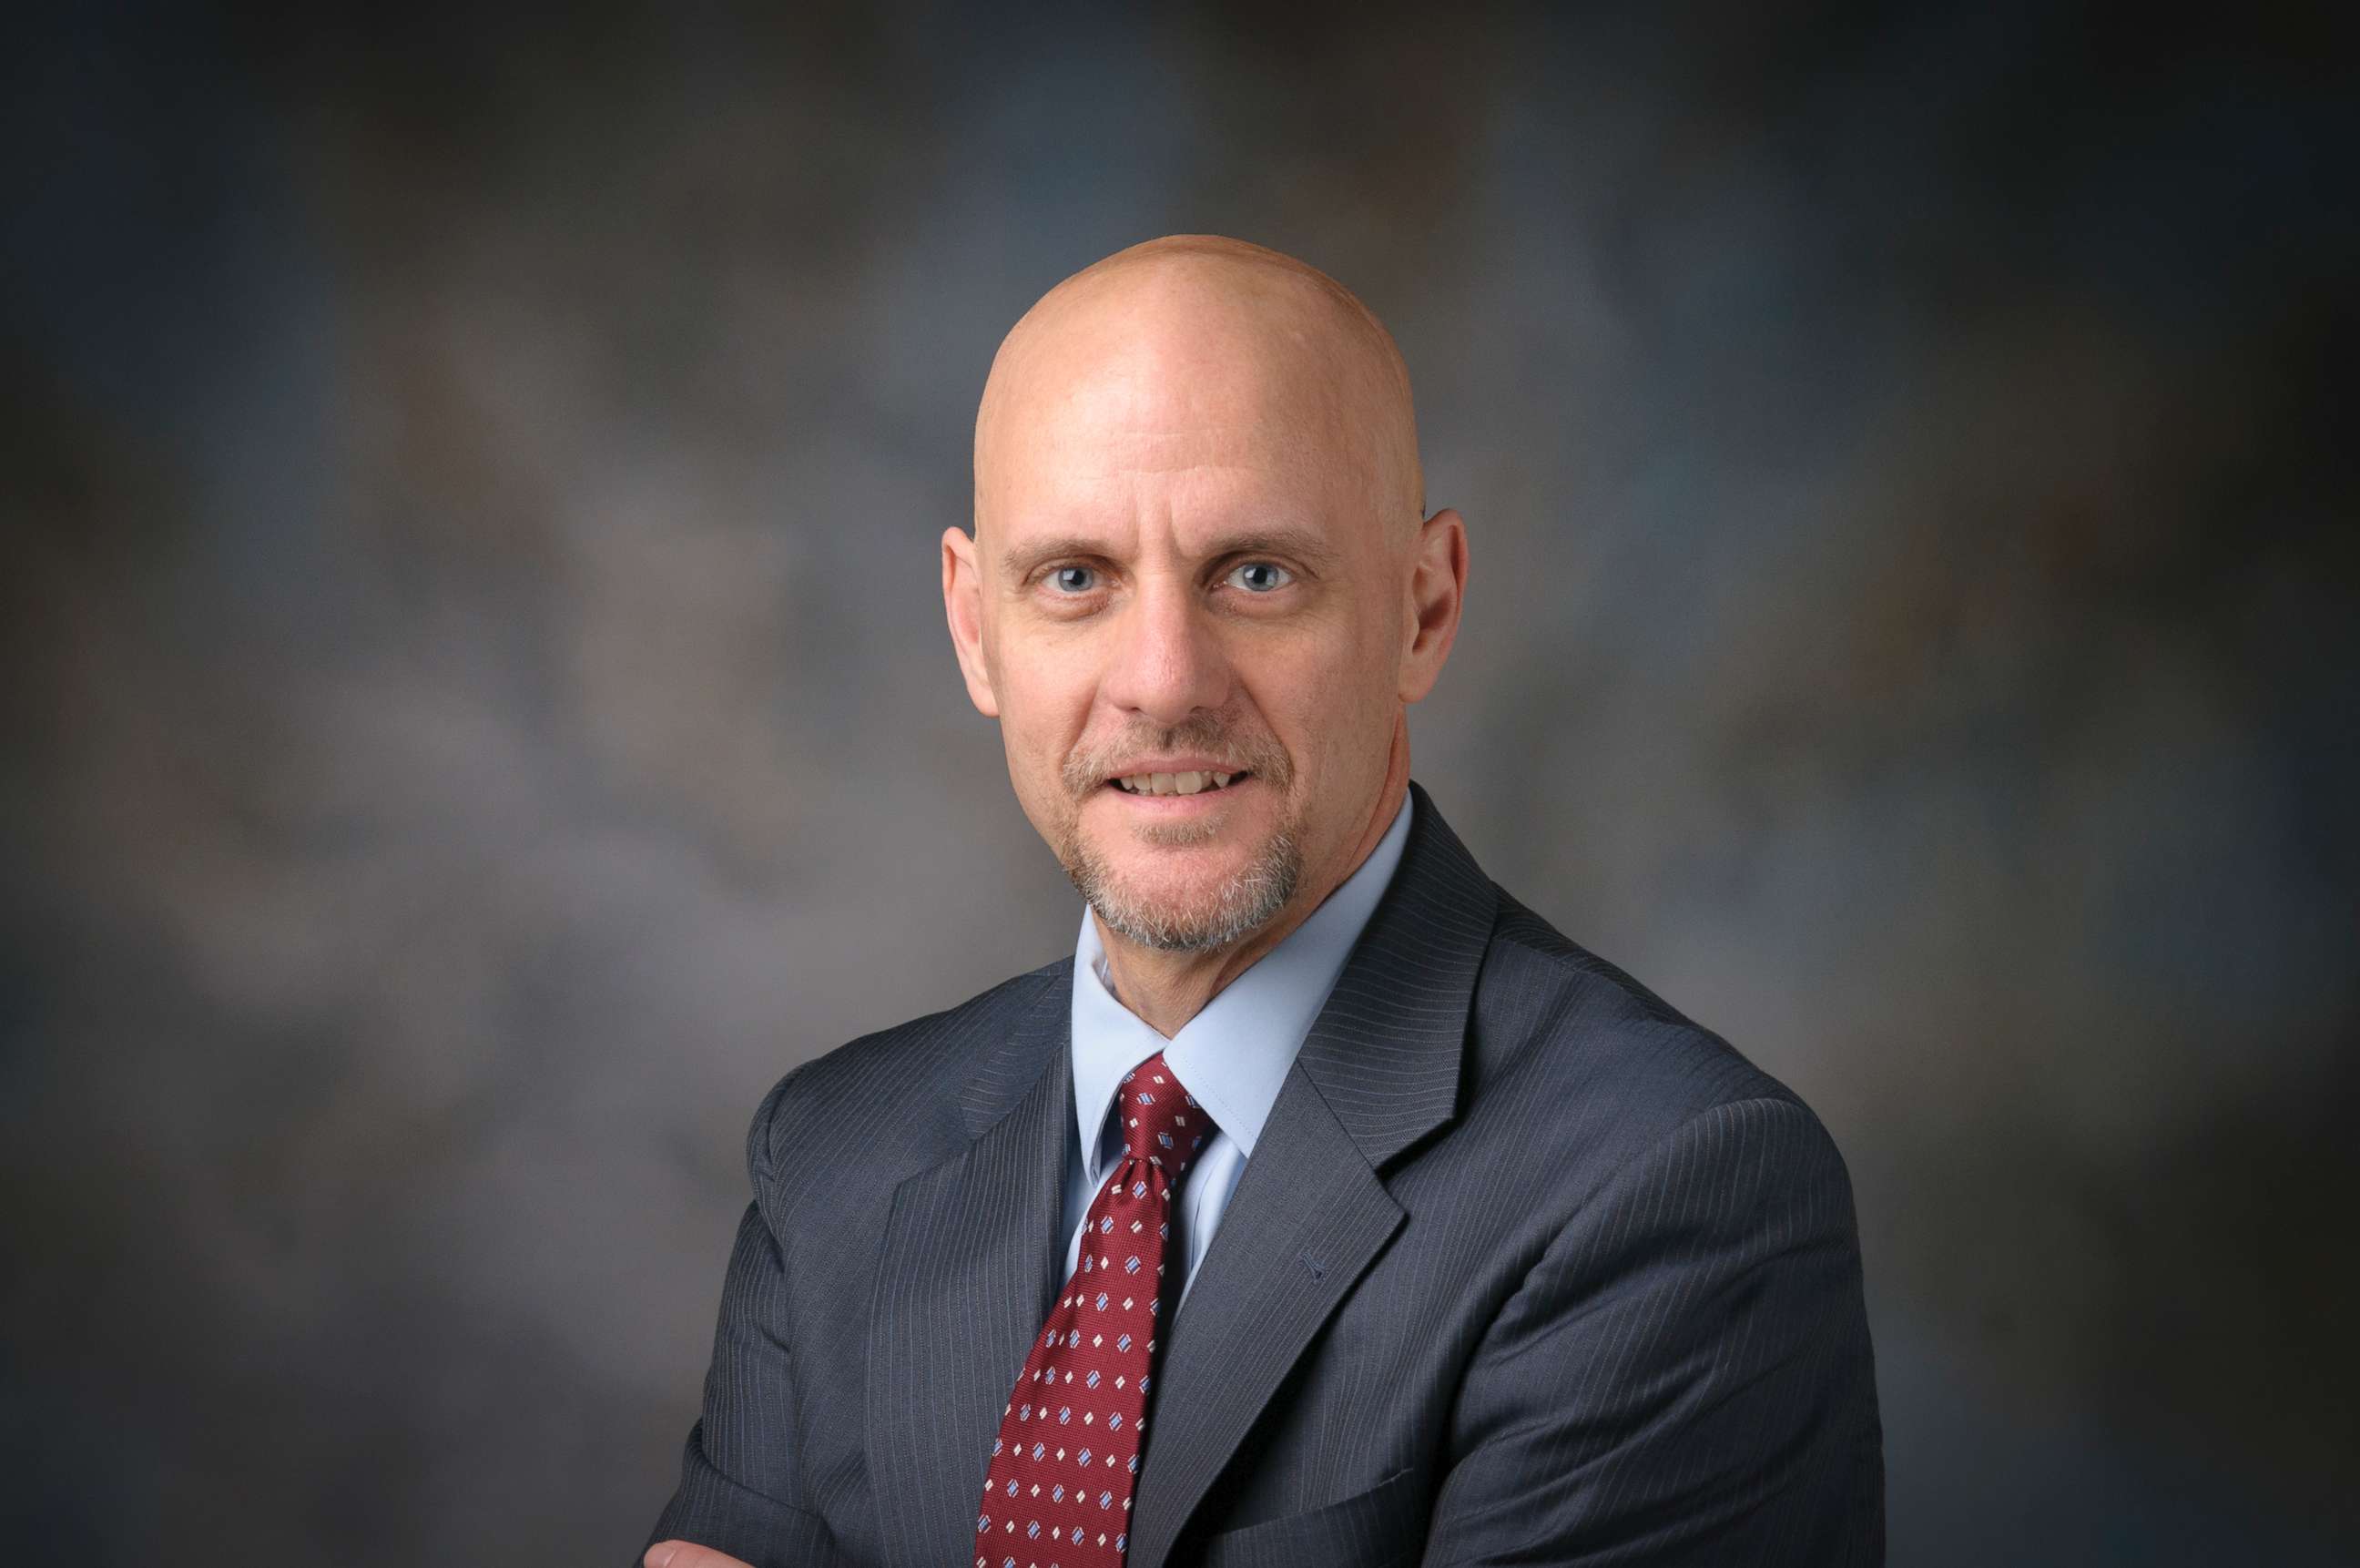 PHOTO: Chief Medical Executive, The University of Texas MD Anderson Cancer Center, Houston, TX and expected nominee for for new FDA commissioner.